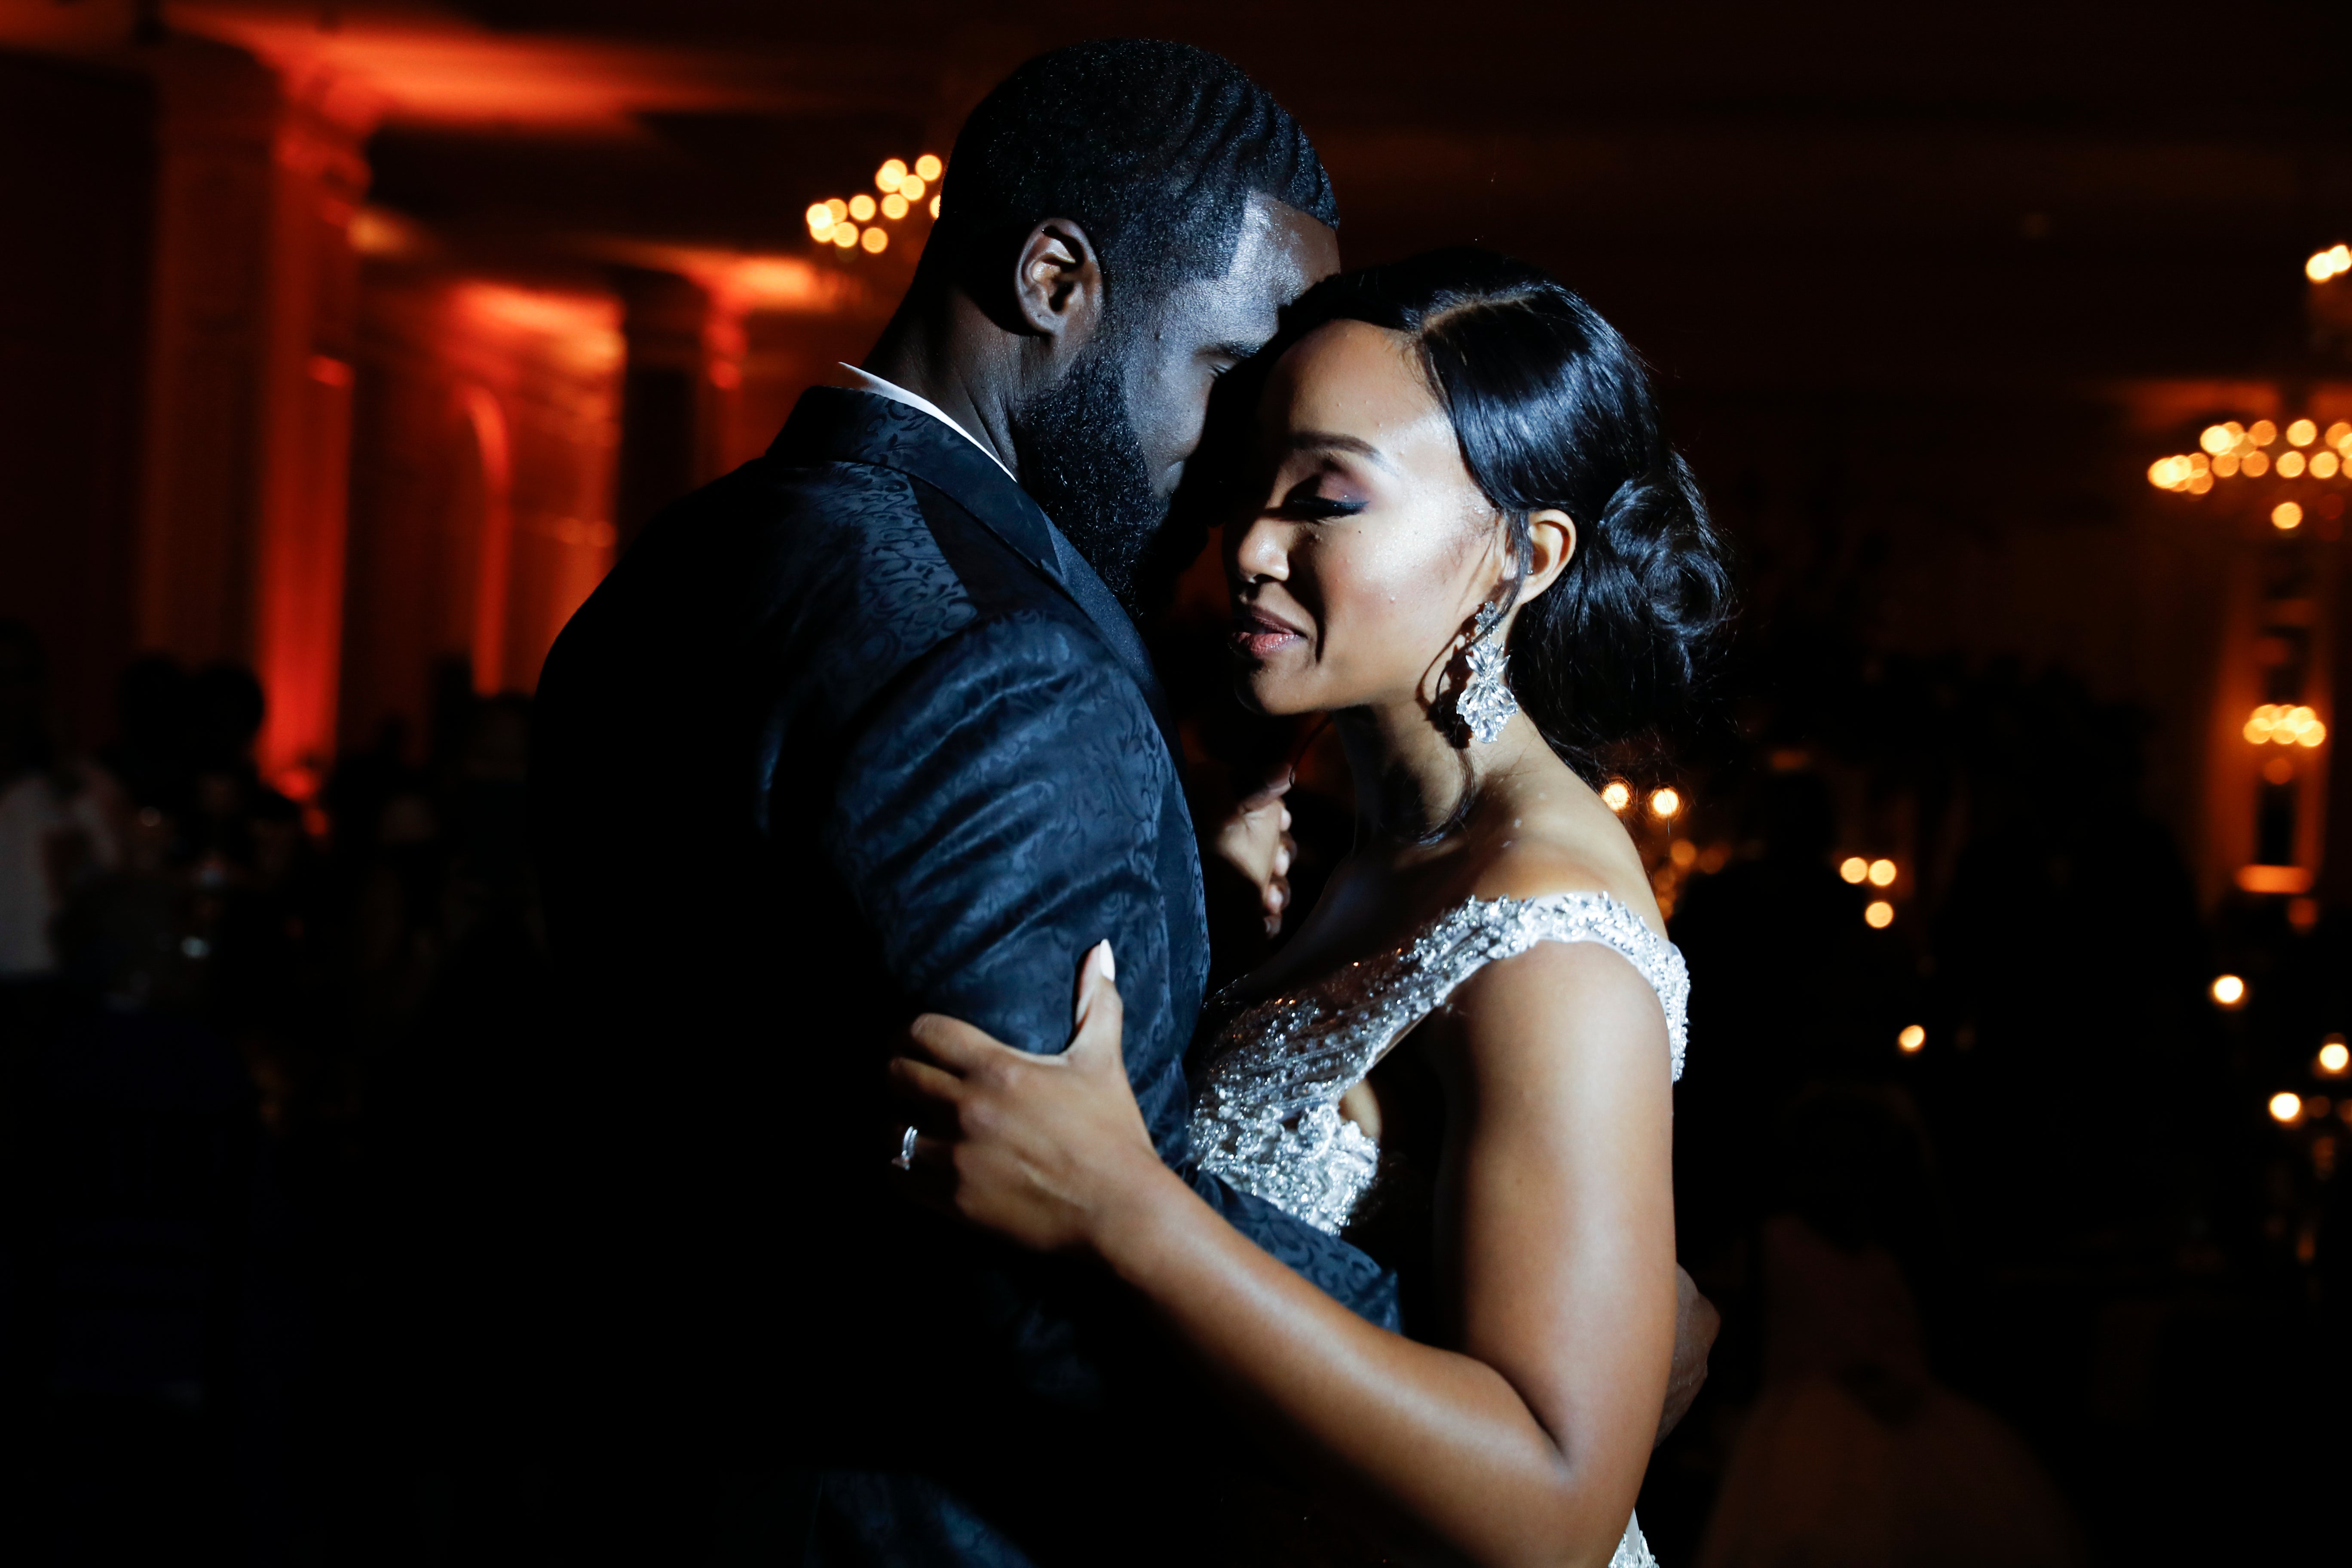 Bridal Bliss: College Sweethearts Zeb and LaToya's Regal Wedding Was Oh So Romantic
